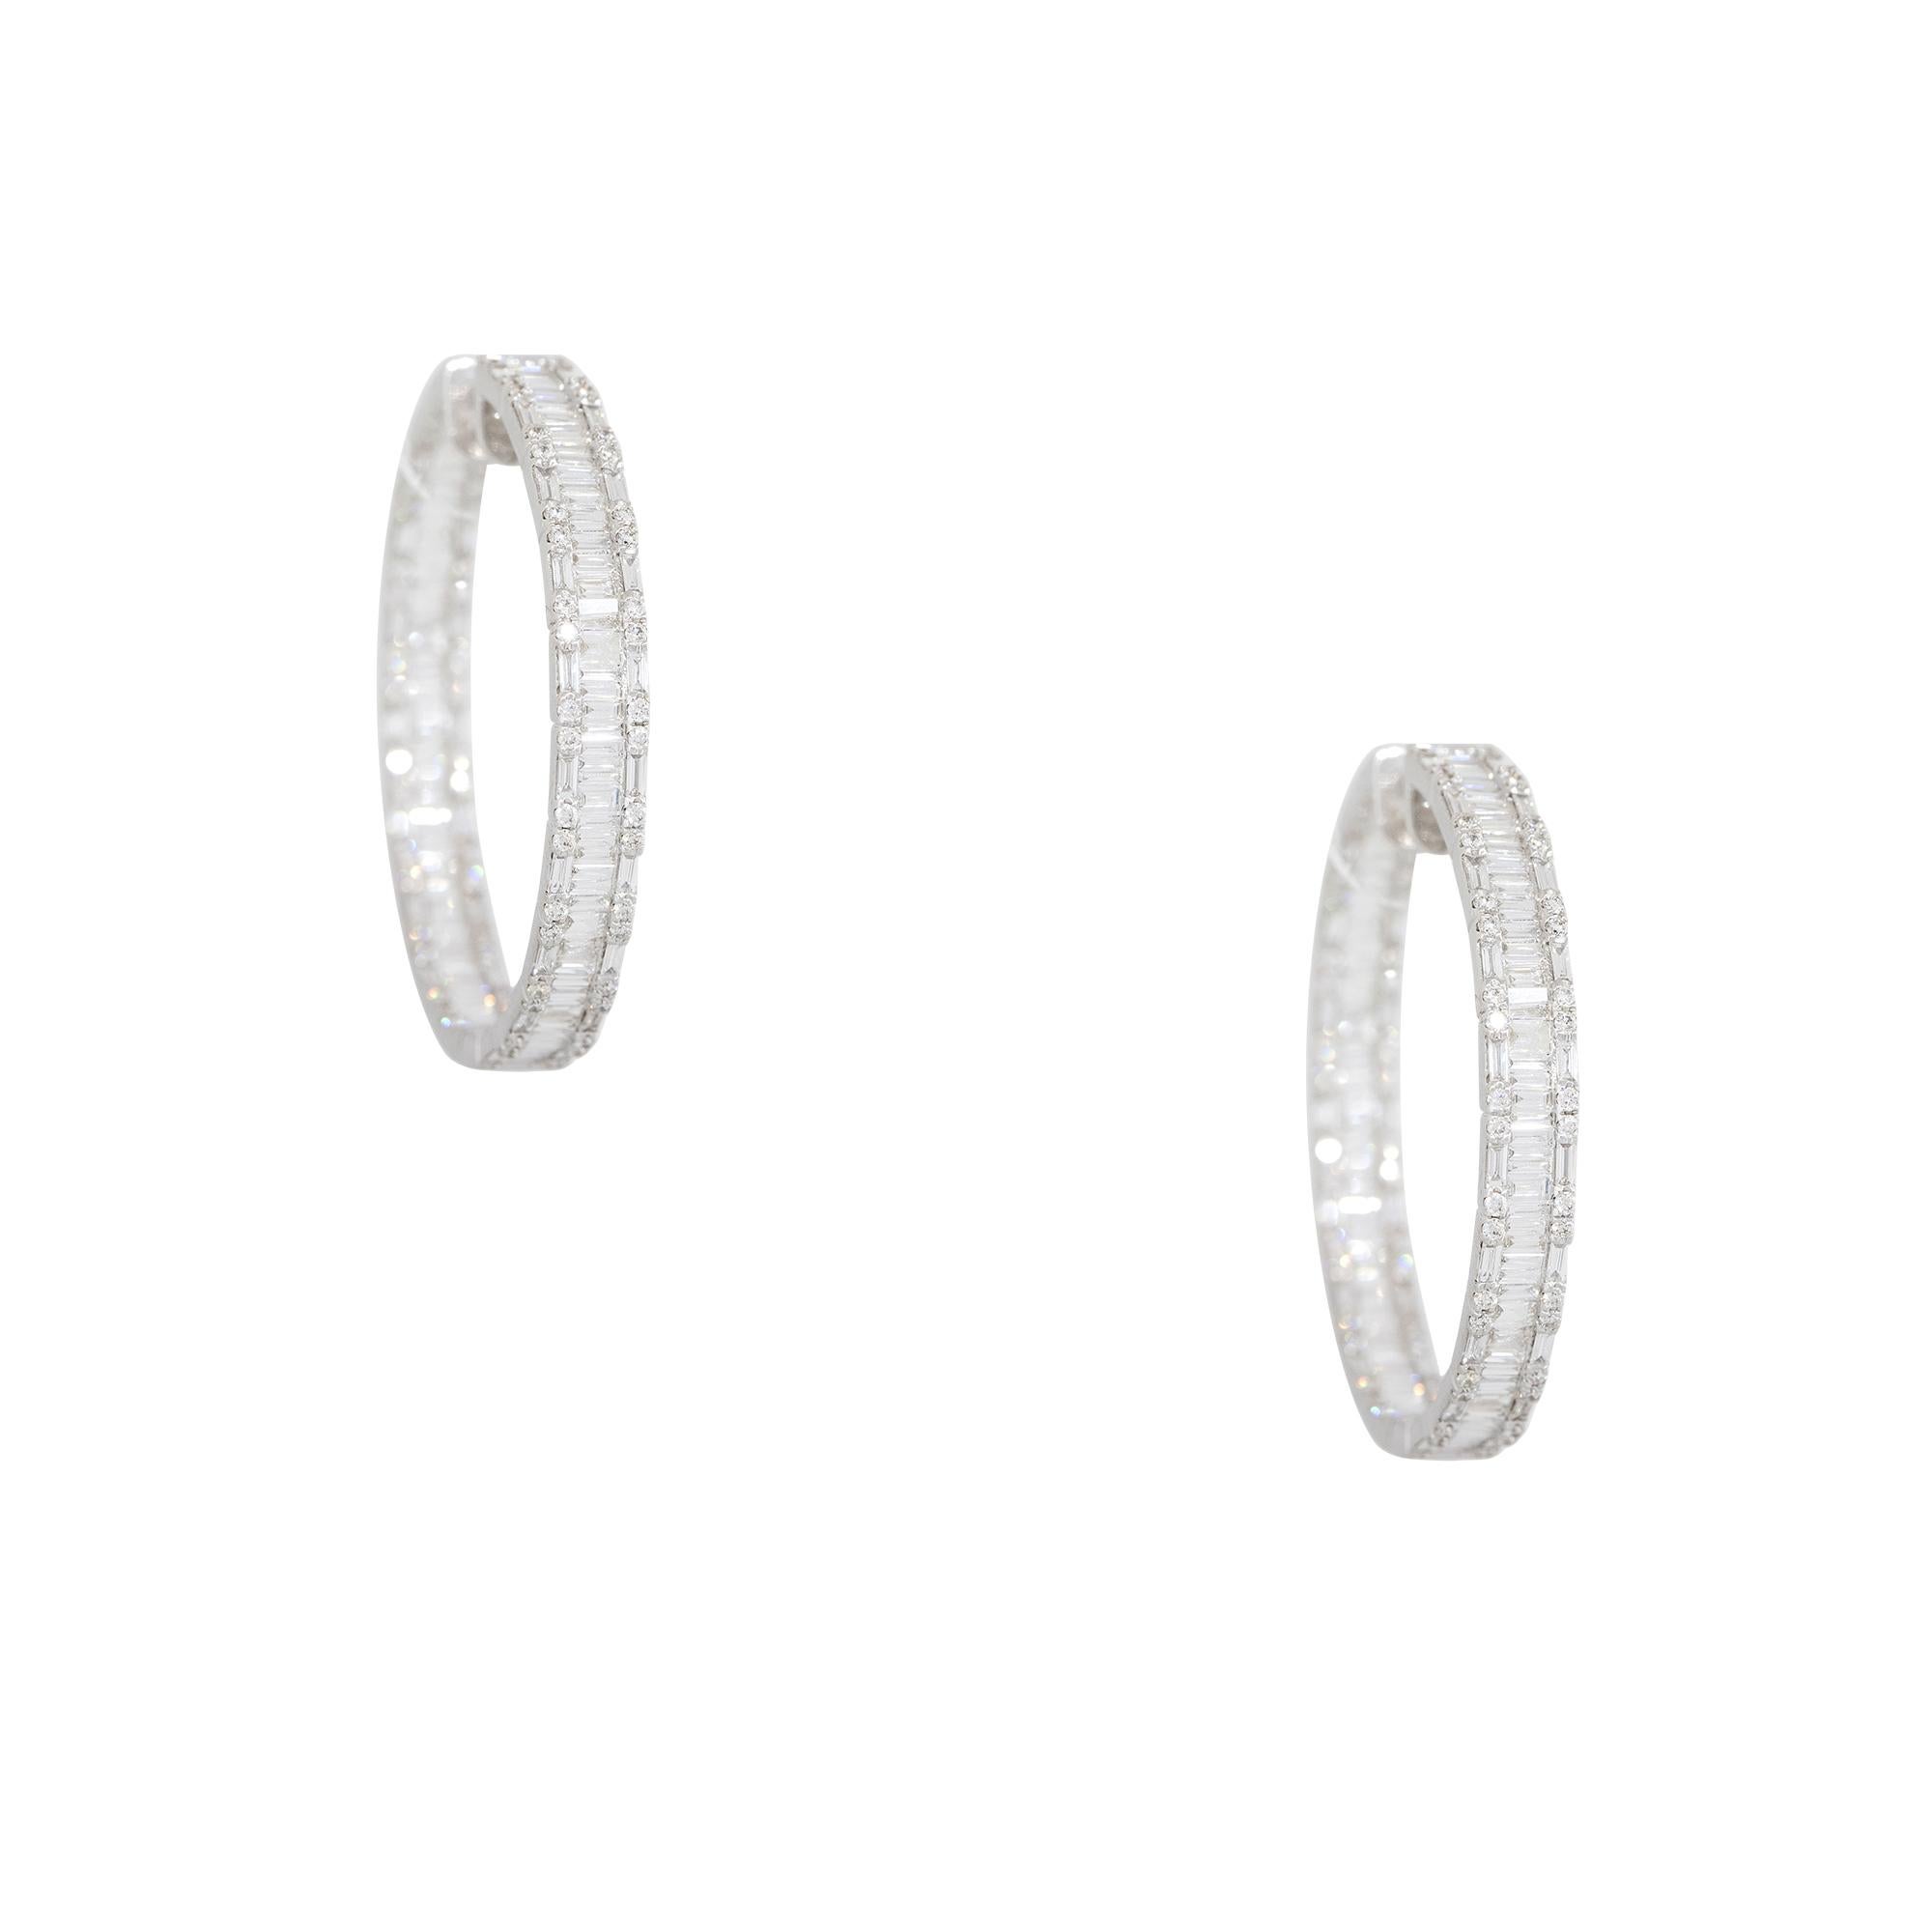 18k White Gold 4.61ctw Diamond Multi-Shape Hoop Earrings

Product: Baguette & Round Brilliant Diamond Hoop Earrings
Material: 18k White Gold
Diamond Details: There are approximately 1.05 carats of Round Brilliant cut diamonds (144 stones) and